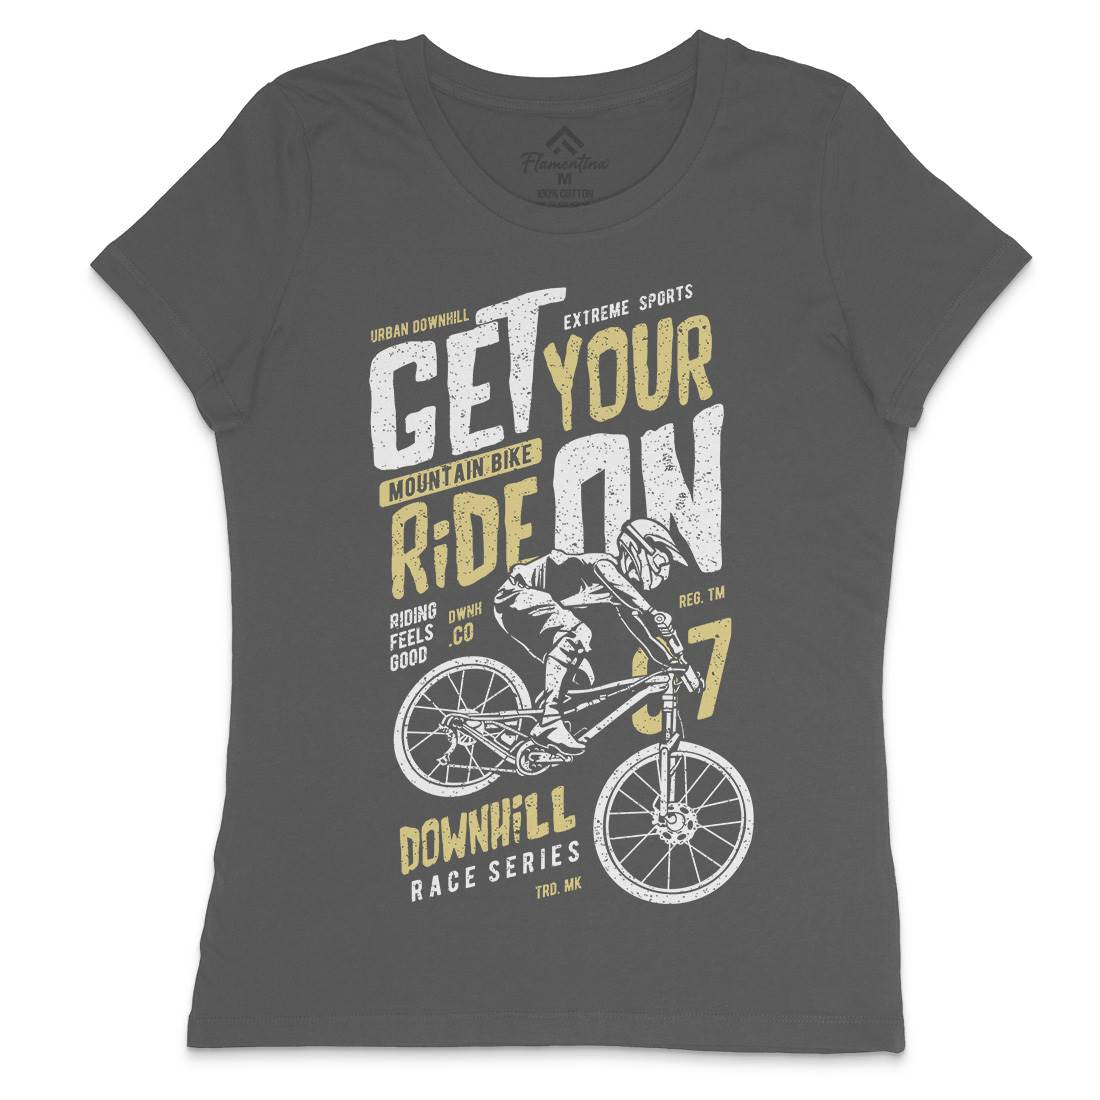 Get Your Ride Womens Crew Neck T-Shirt Bikes A673